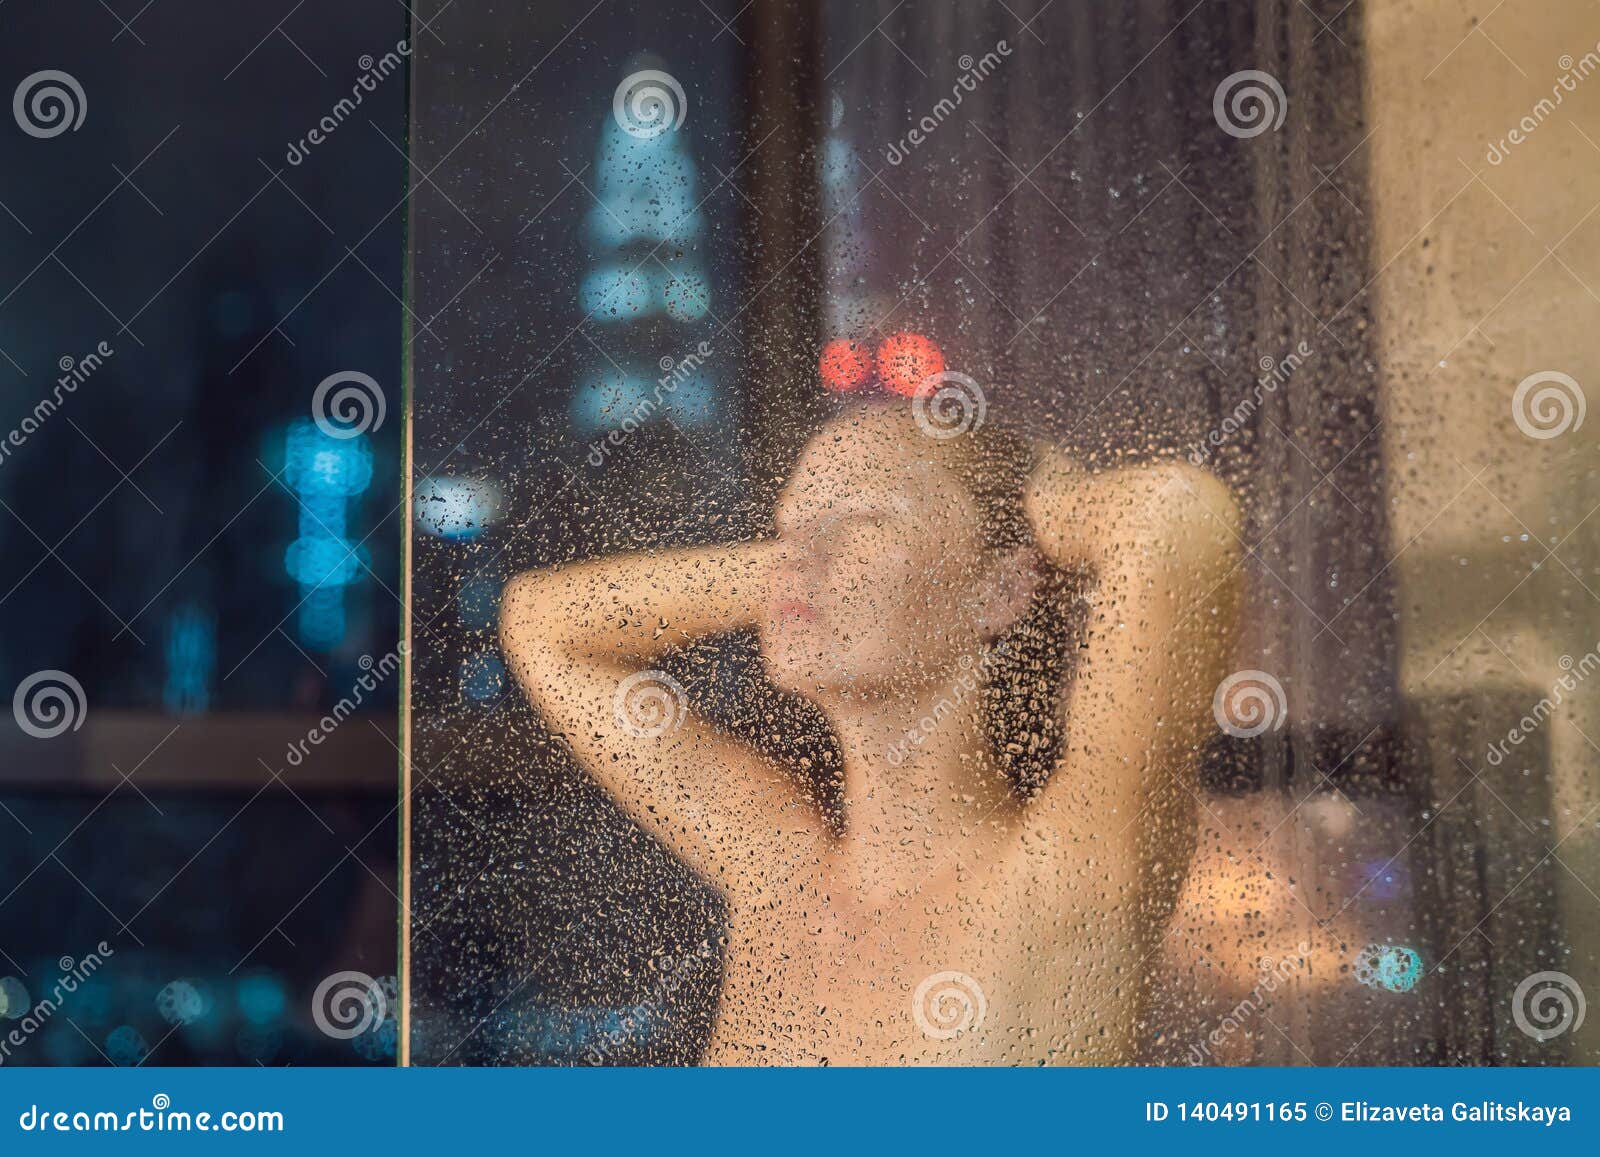 Beautiful Woman In The Shower Behind Glass With Drops On The Background